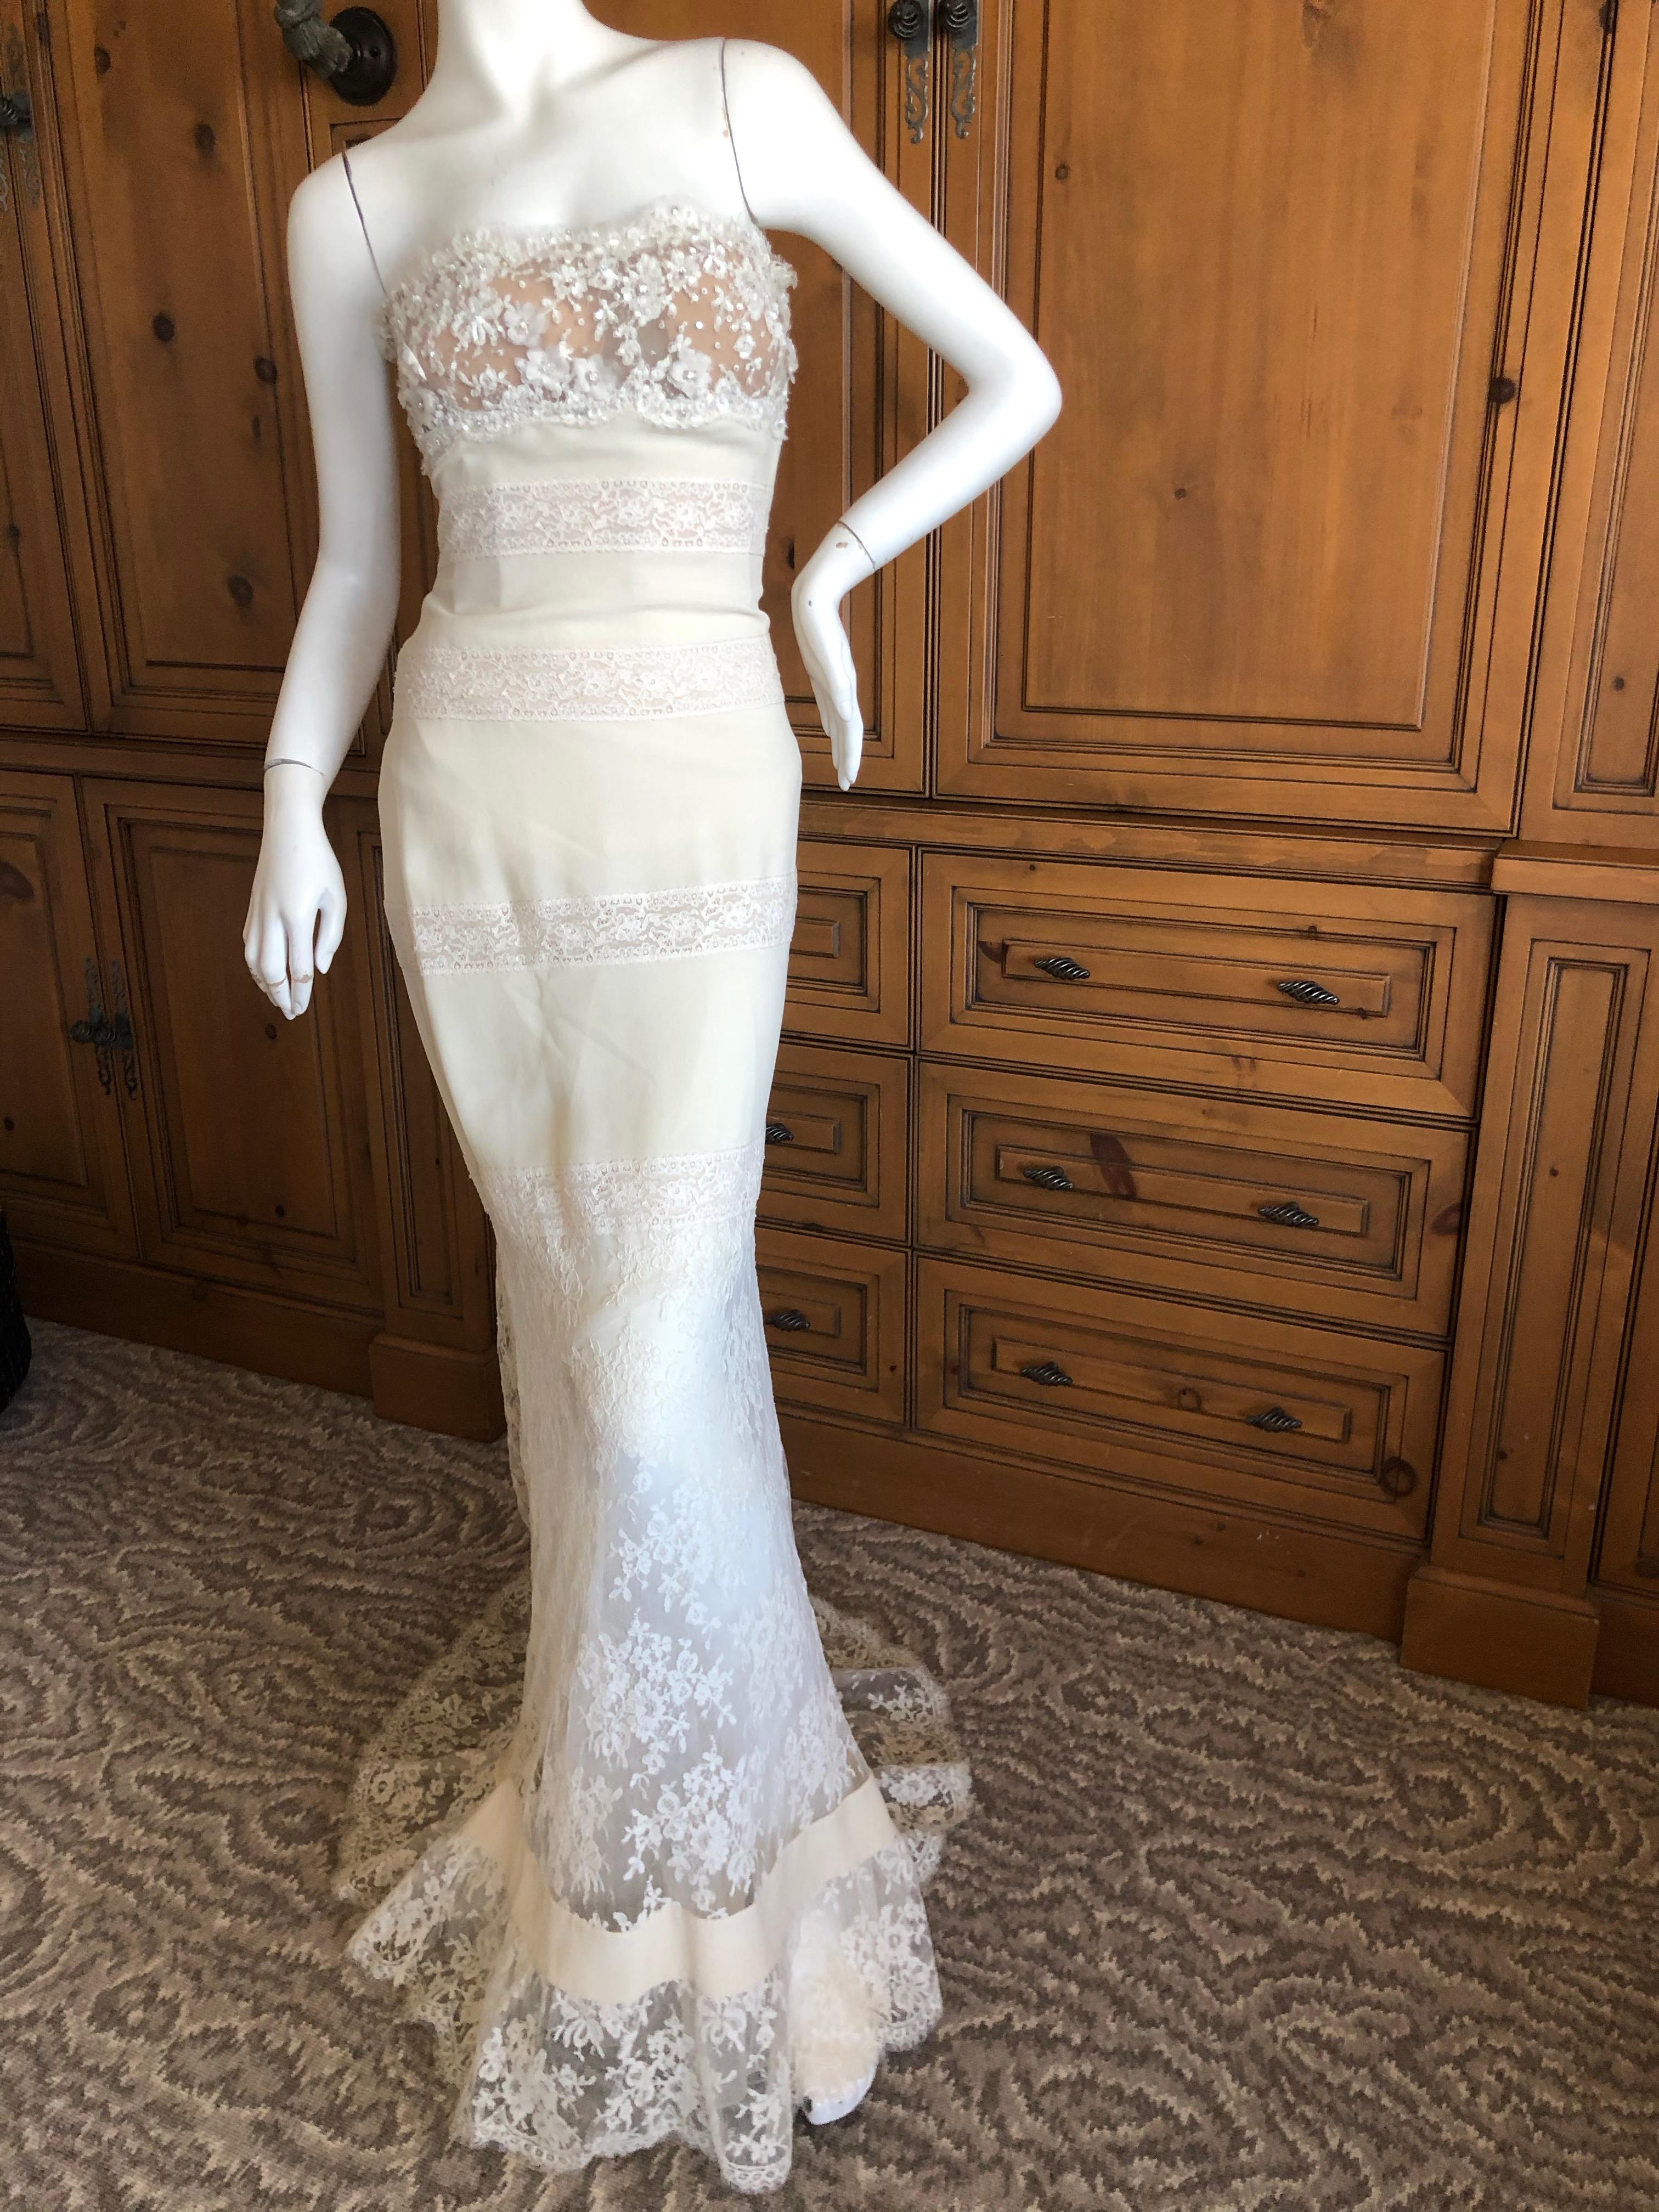 Valentino Vintage Lace Wedding or Evening Dress with Train In Excellent Condition For Sale In Cloverdale, CA